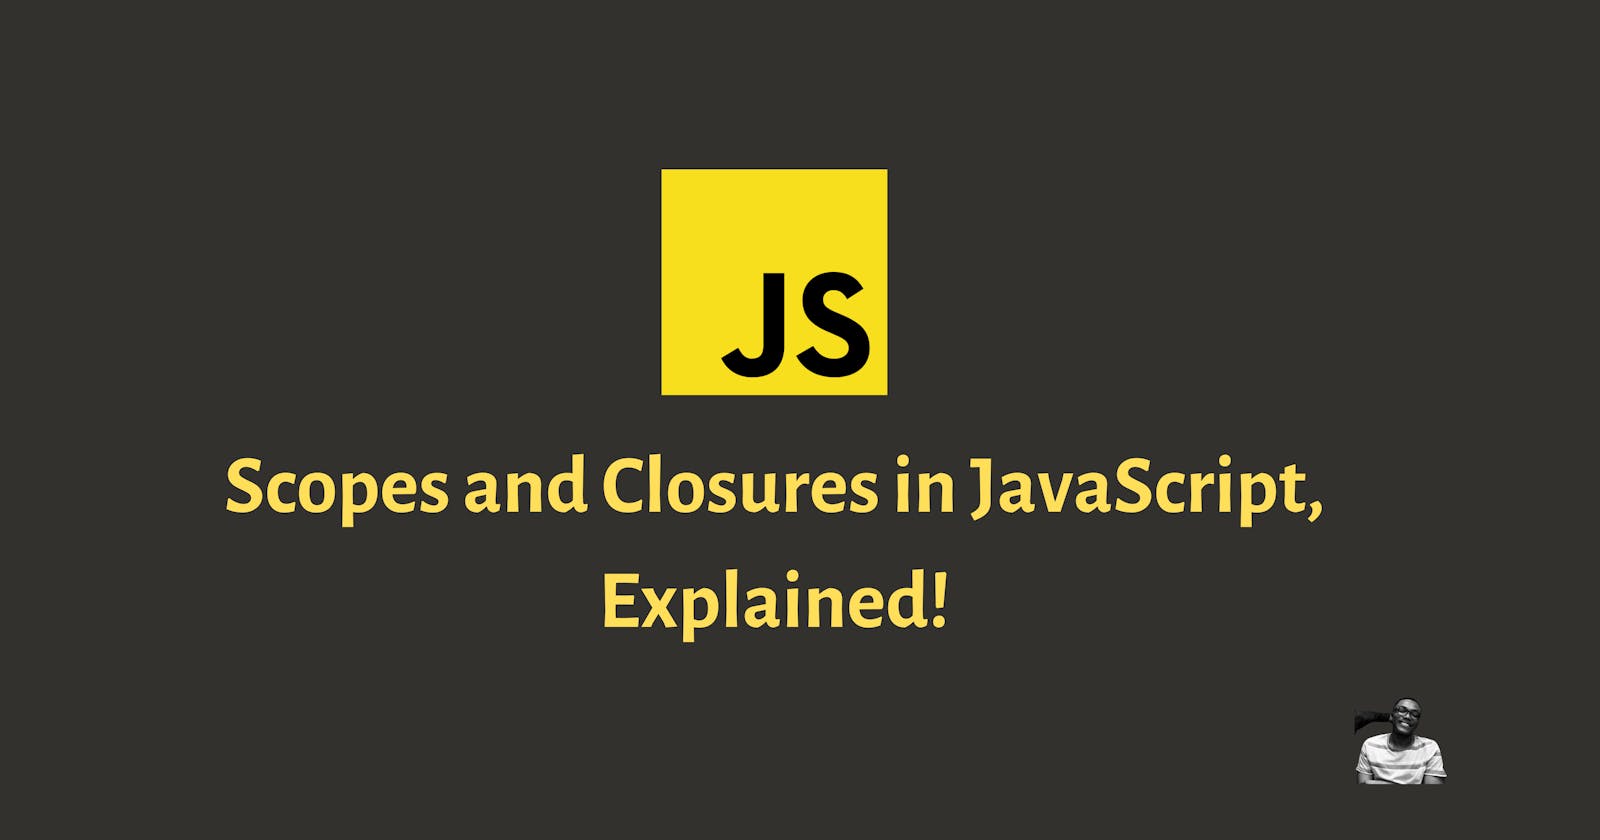 JavaScript's scopes and closures have been explained!